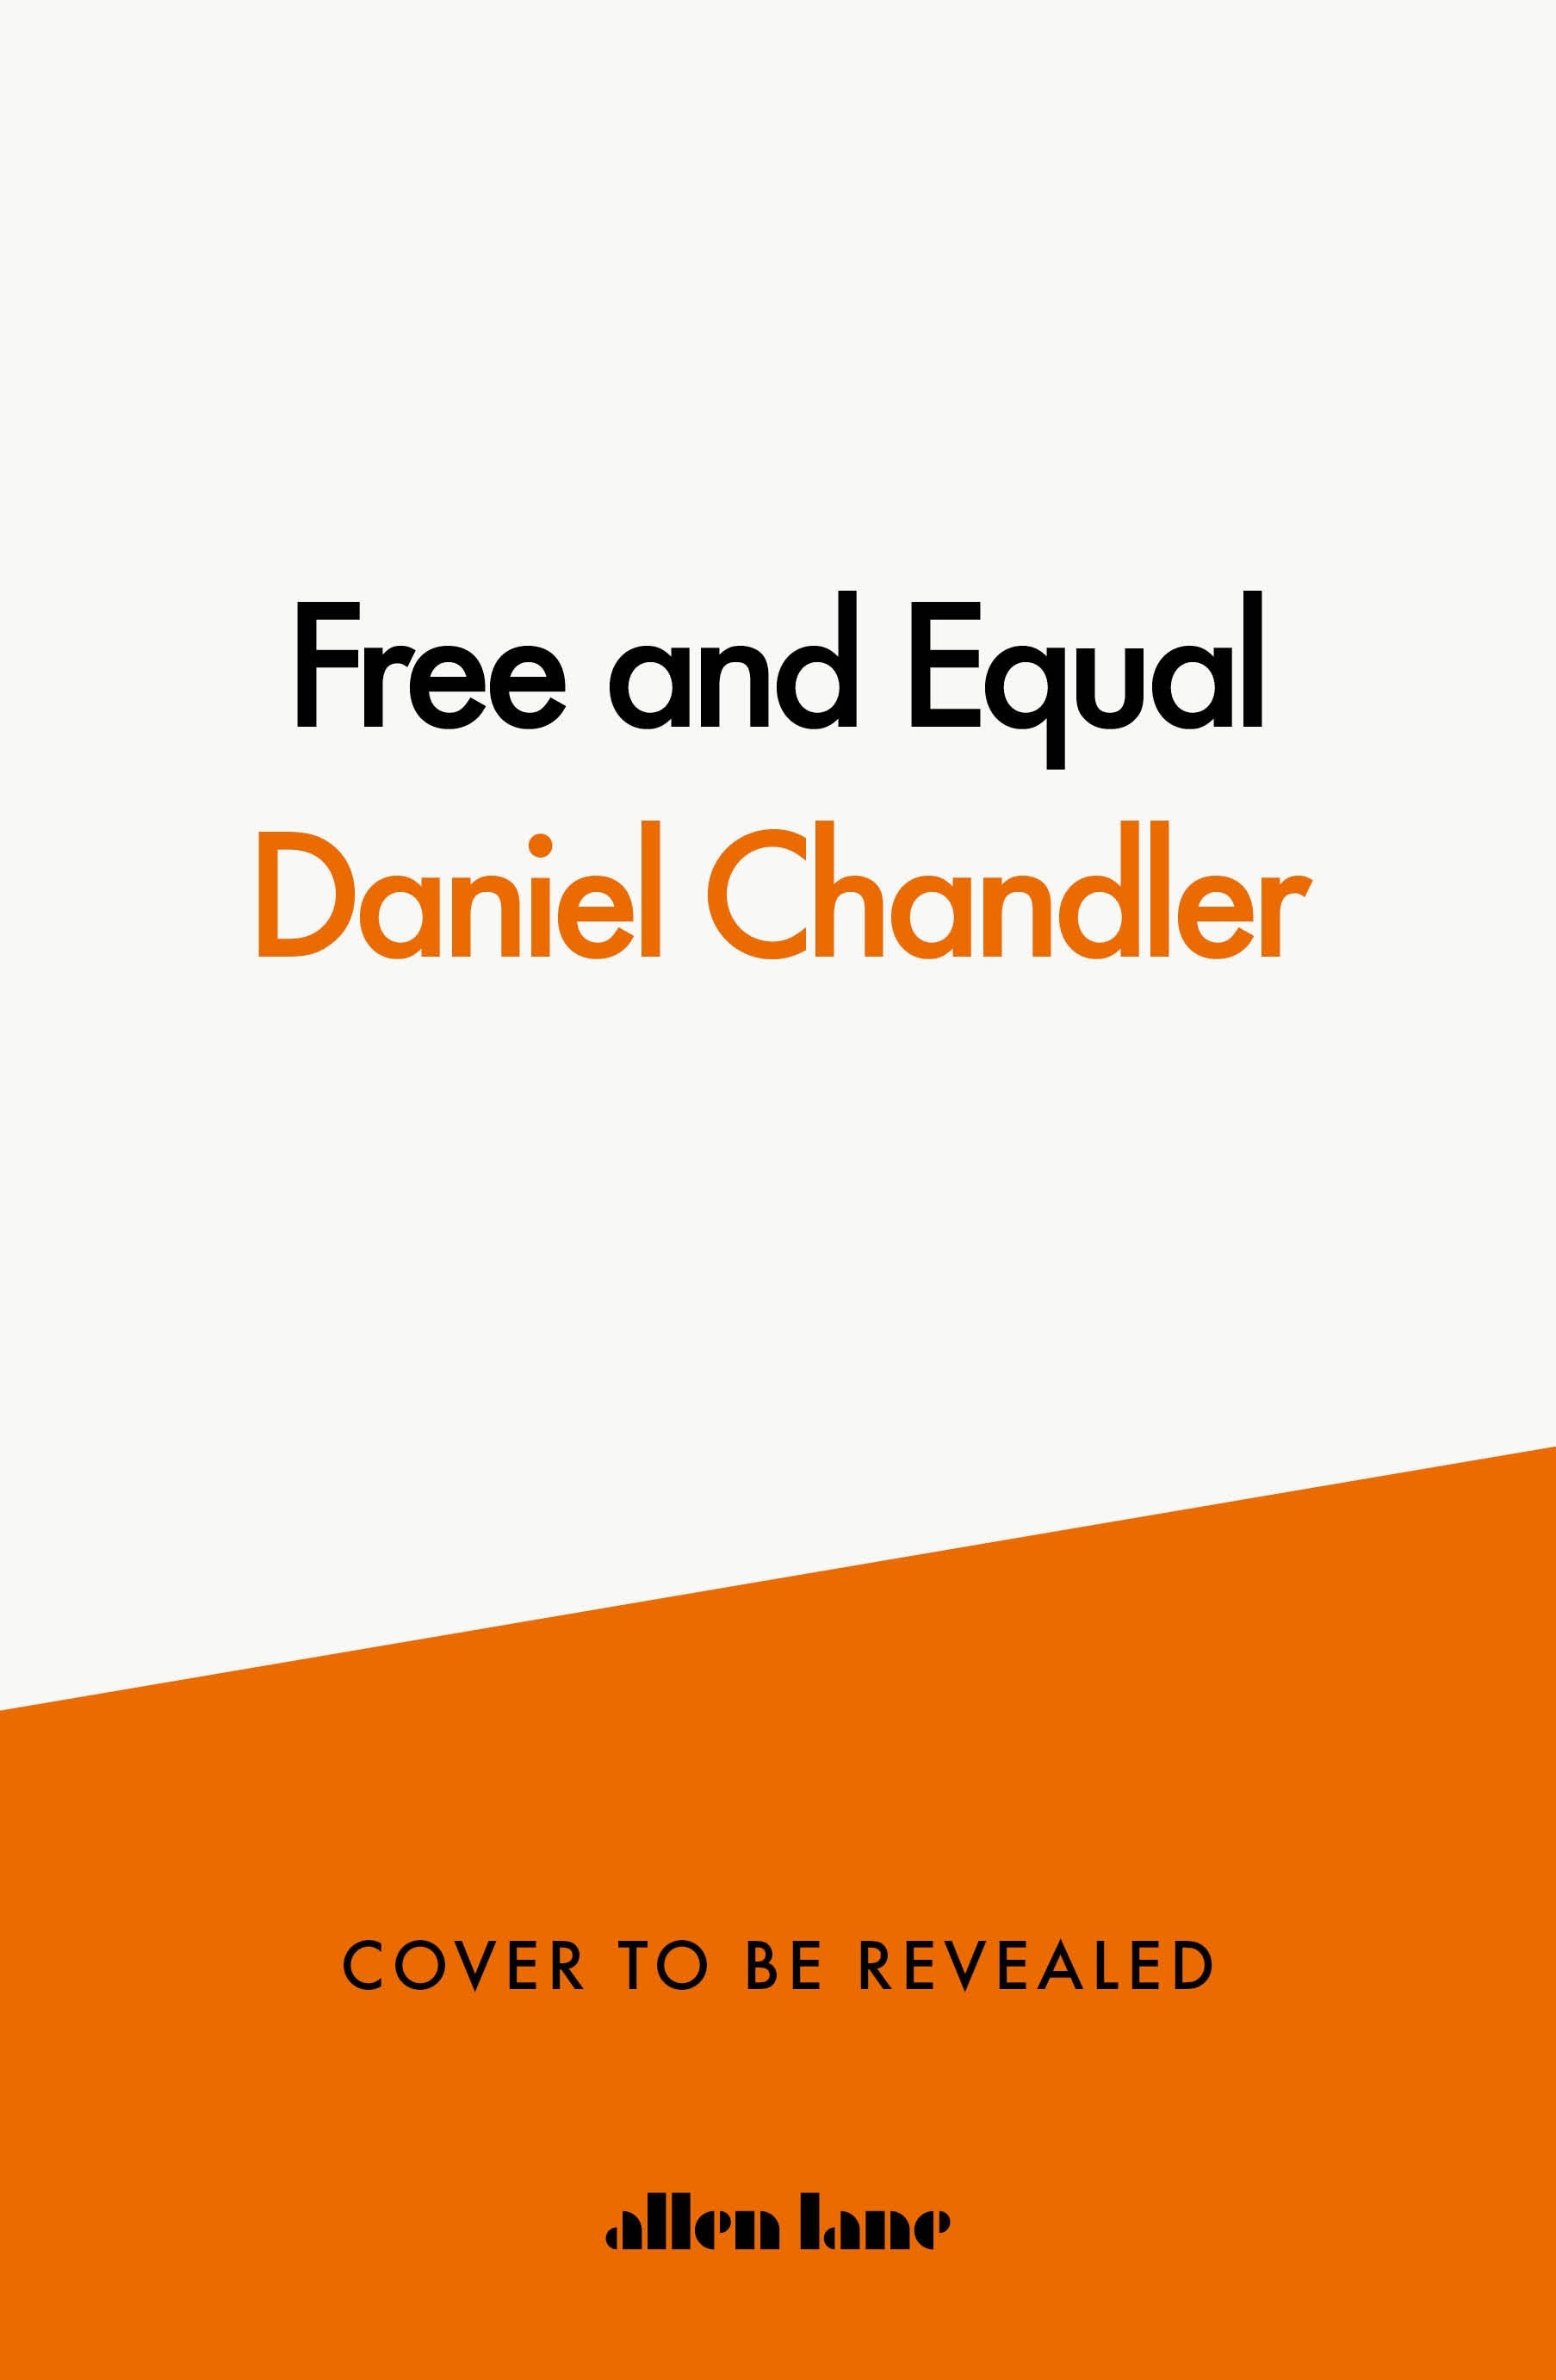 Book “Free and Equal” by Daniel Chandler — February 23, 2023